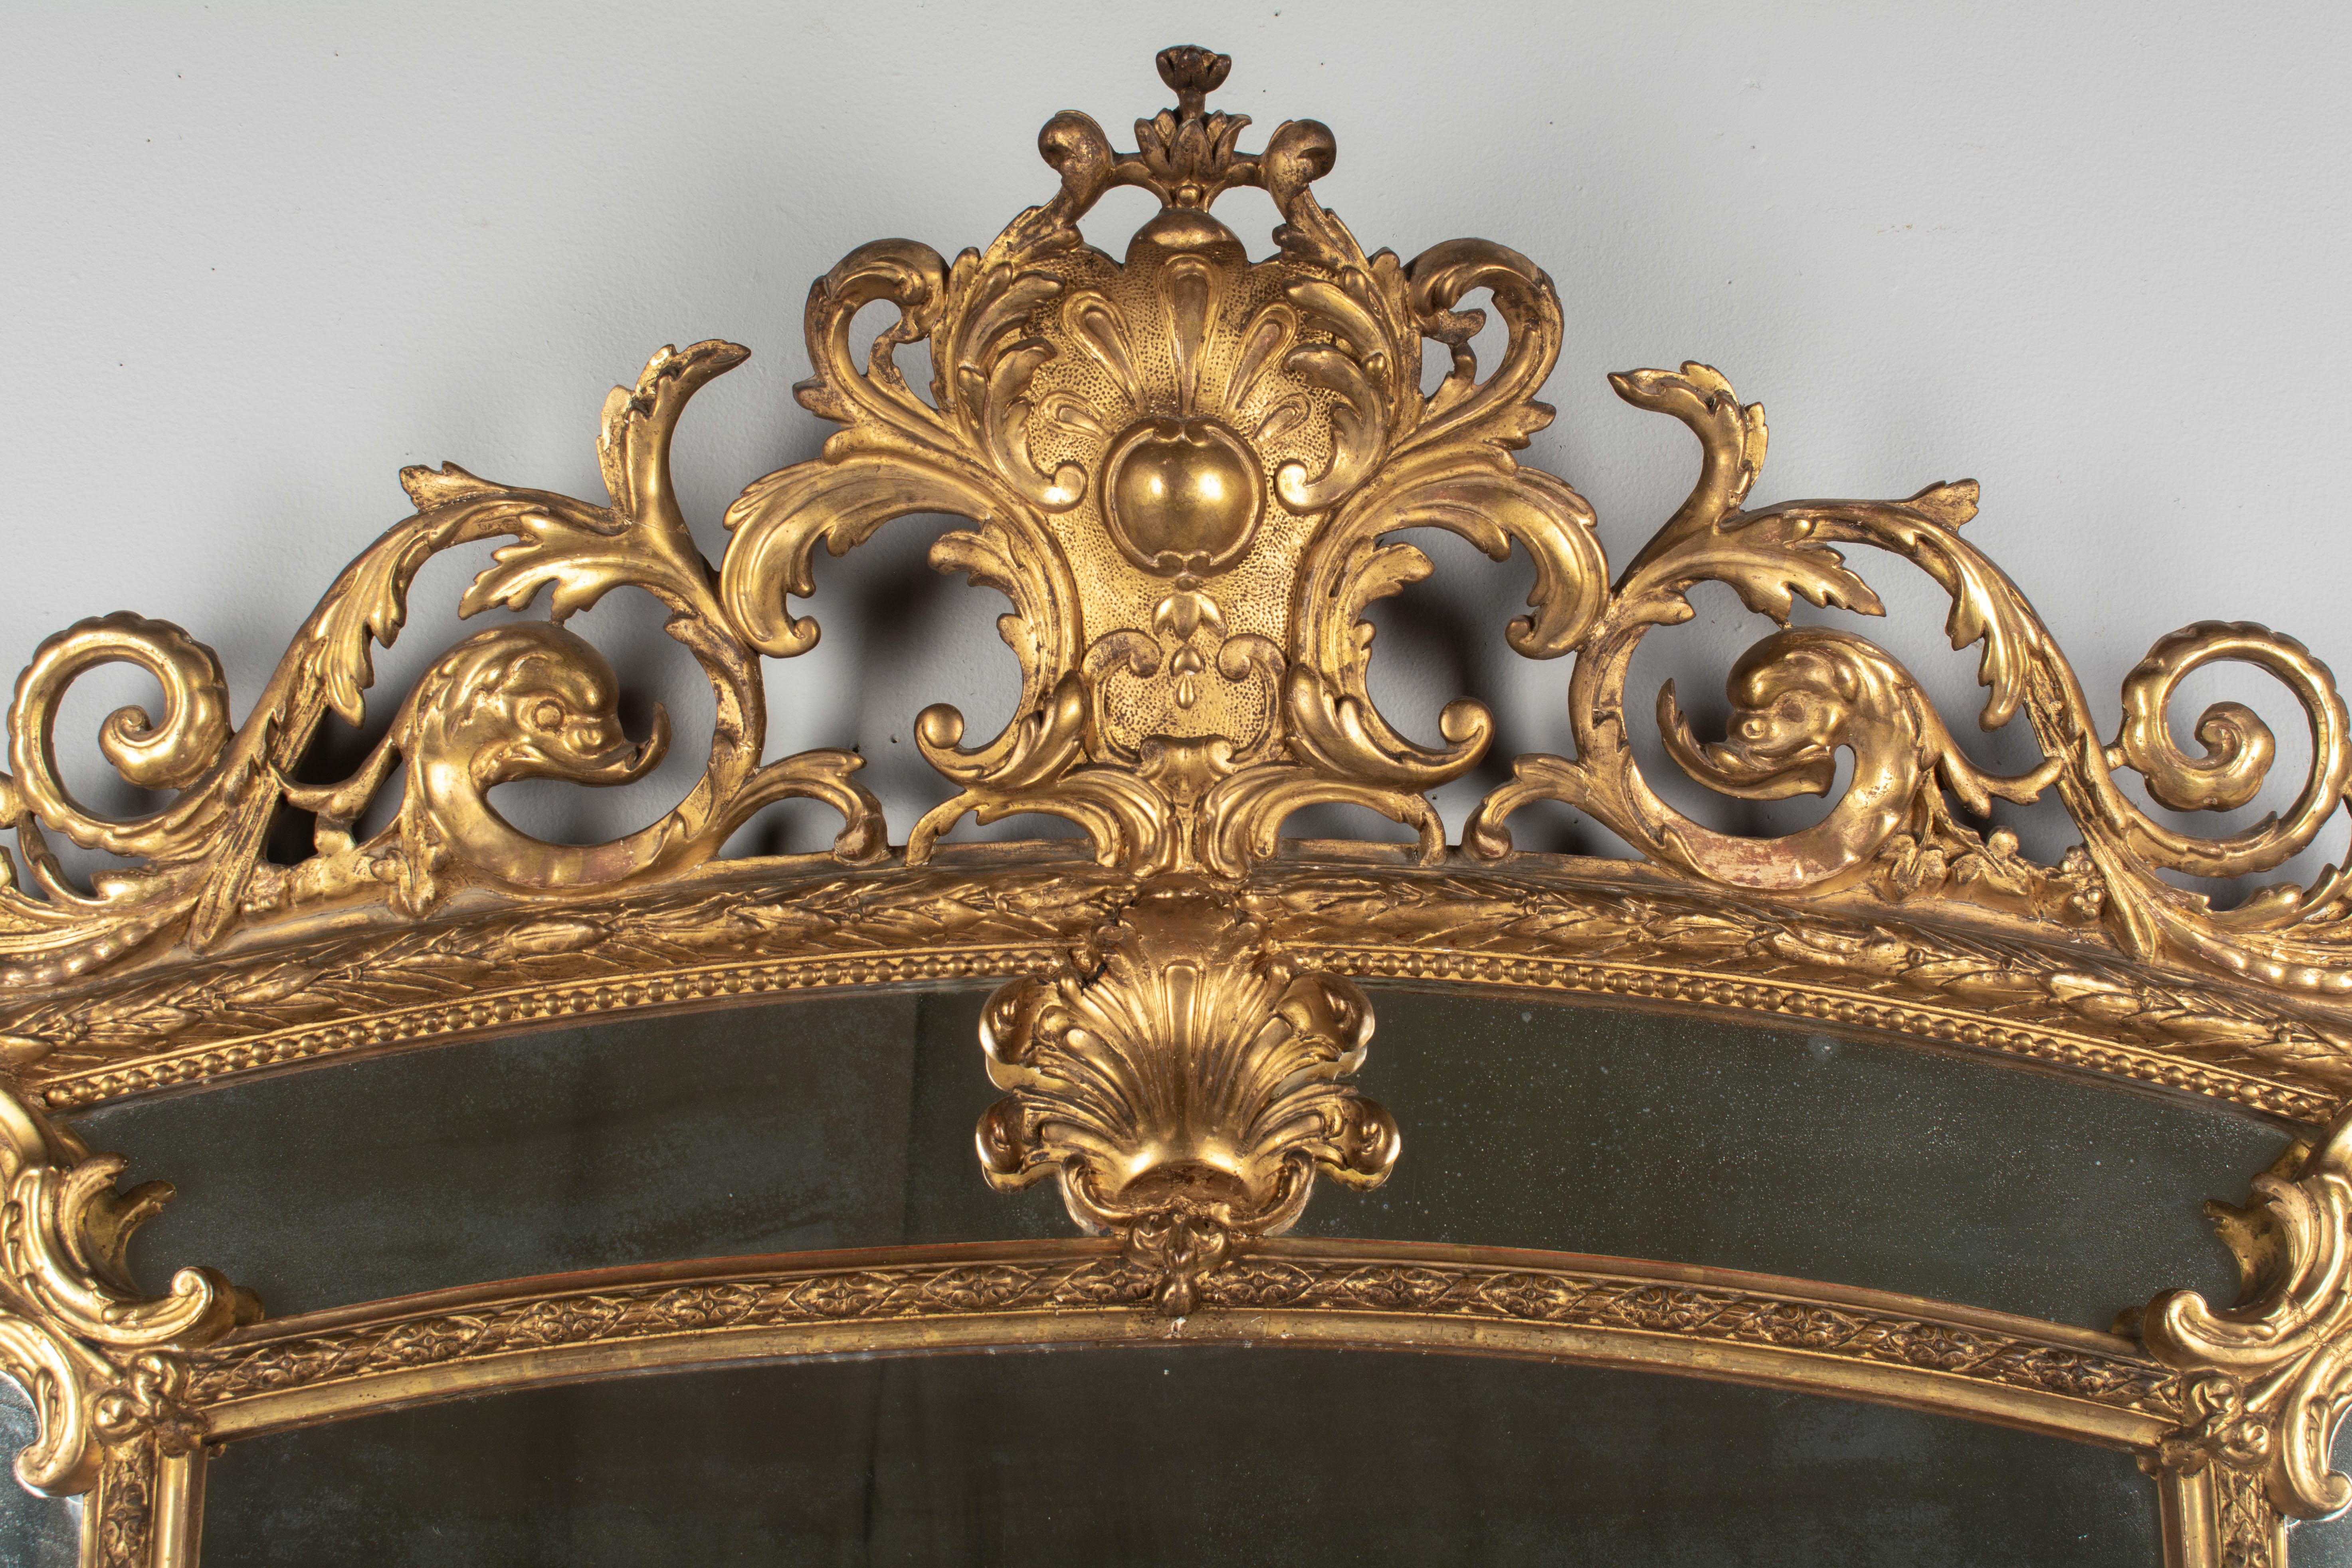 An exceptional Louis XV style giltwood parclose mirror. Elaborate crest with large shell form flanked by dolphins and swirling acanthus leaves. Beautiful carved details include Fleur de Lis motifs in the corners and small flower bouquets on the